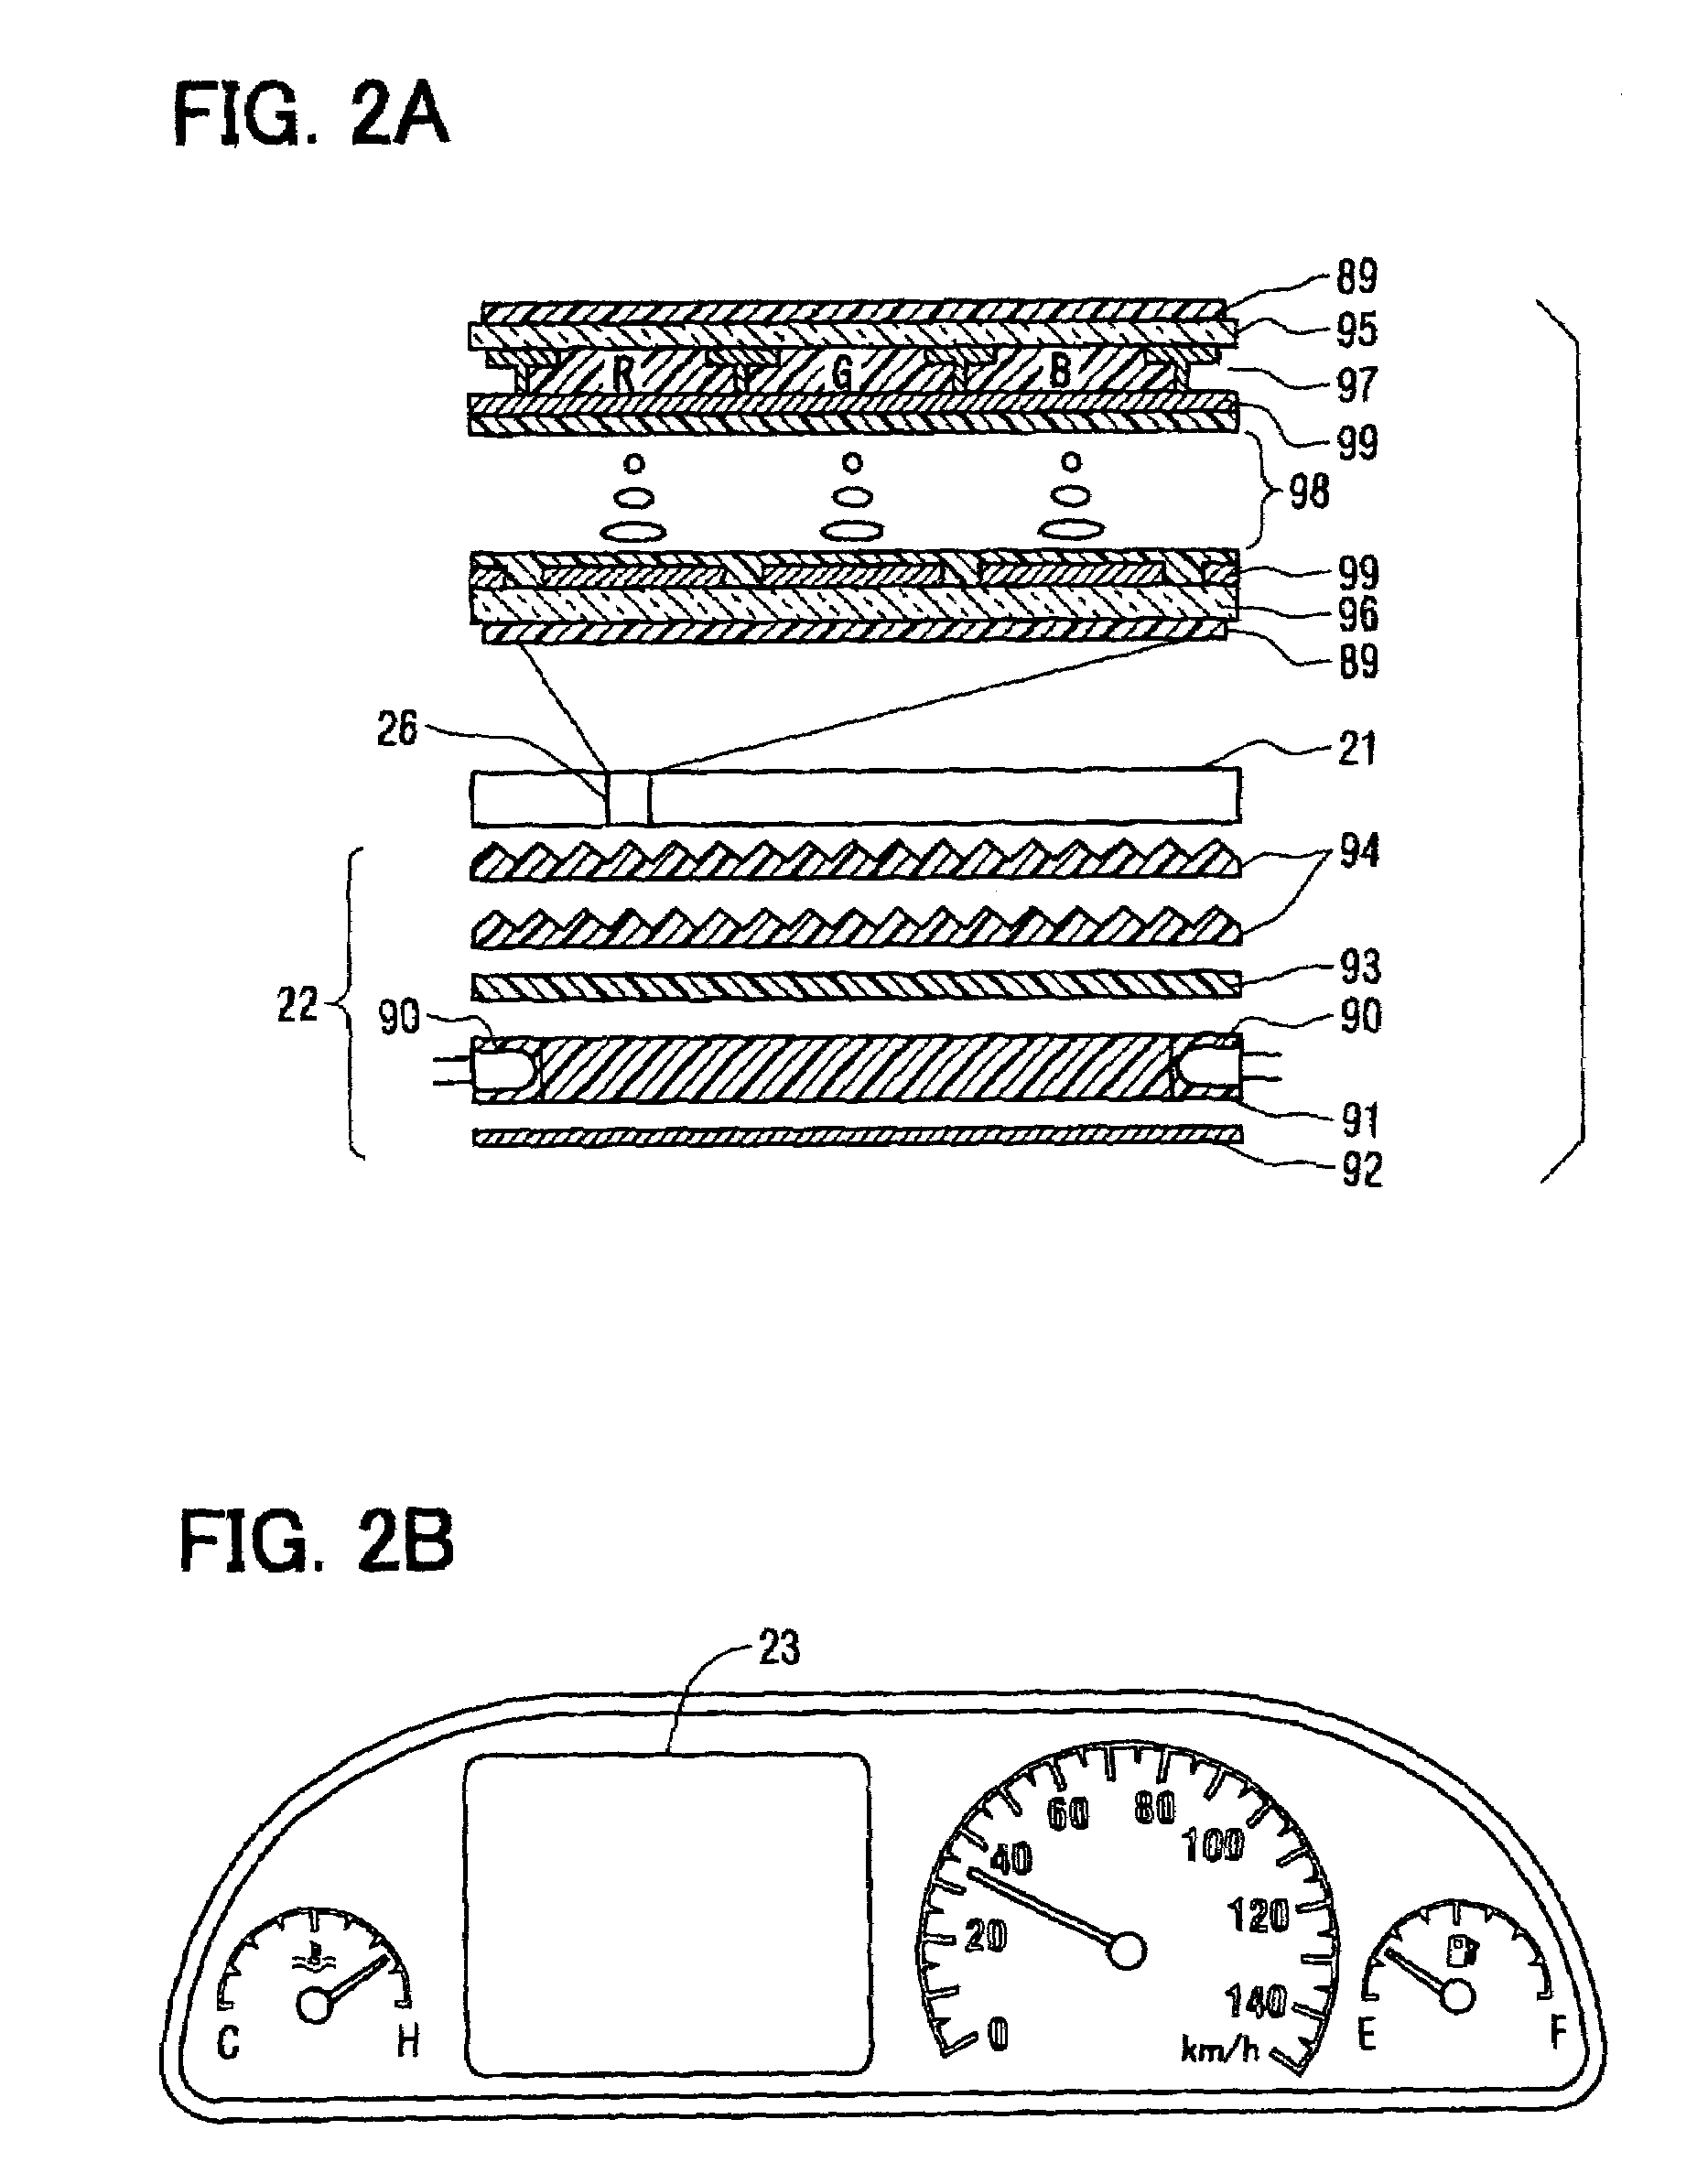 Full-color display device